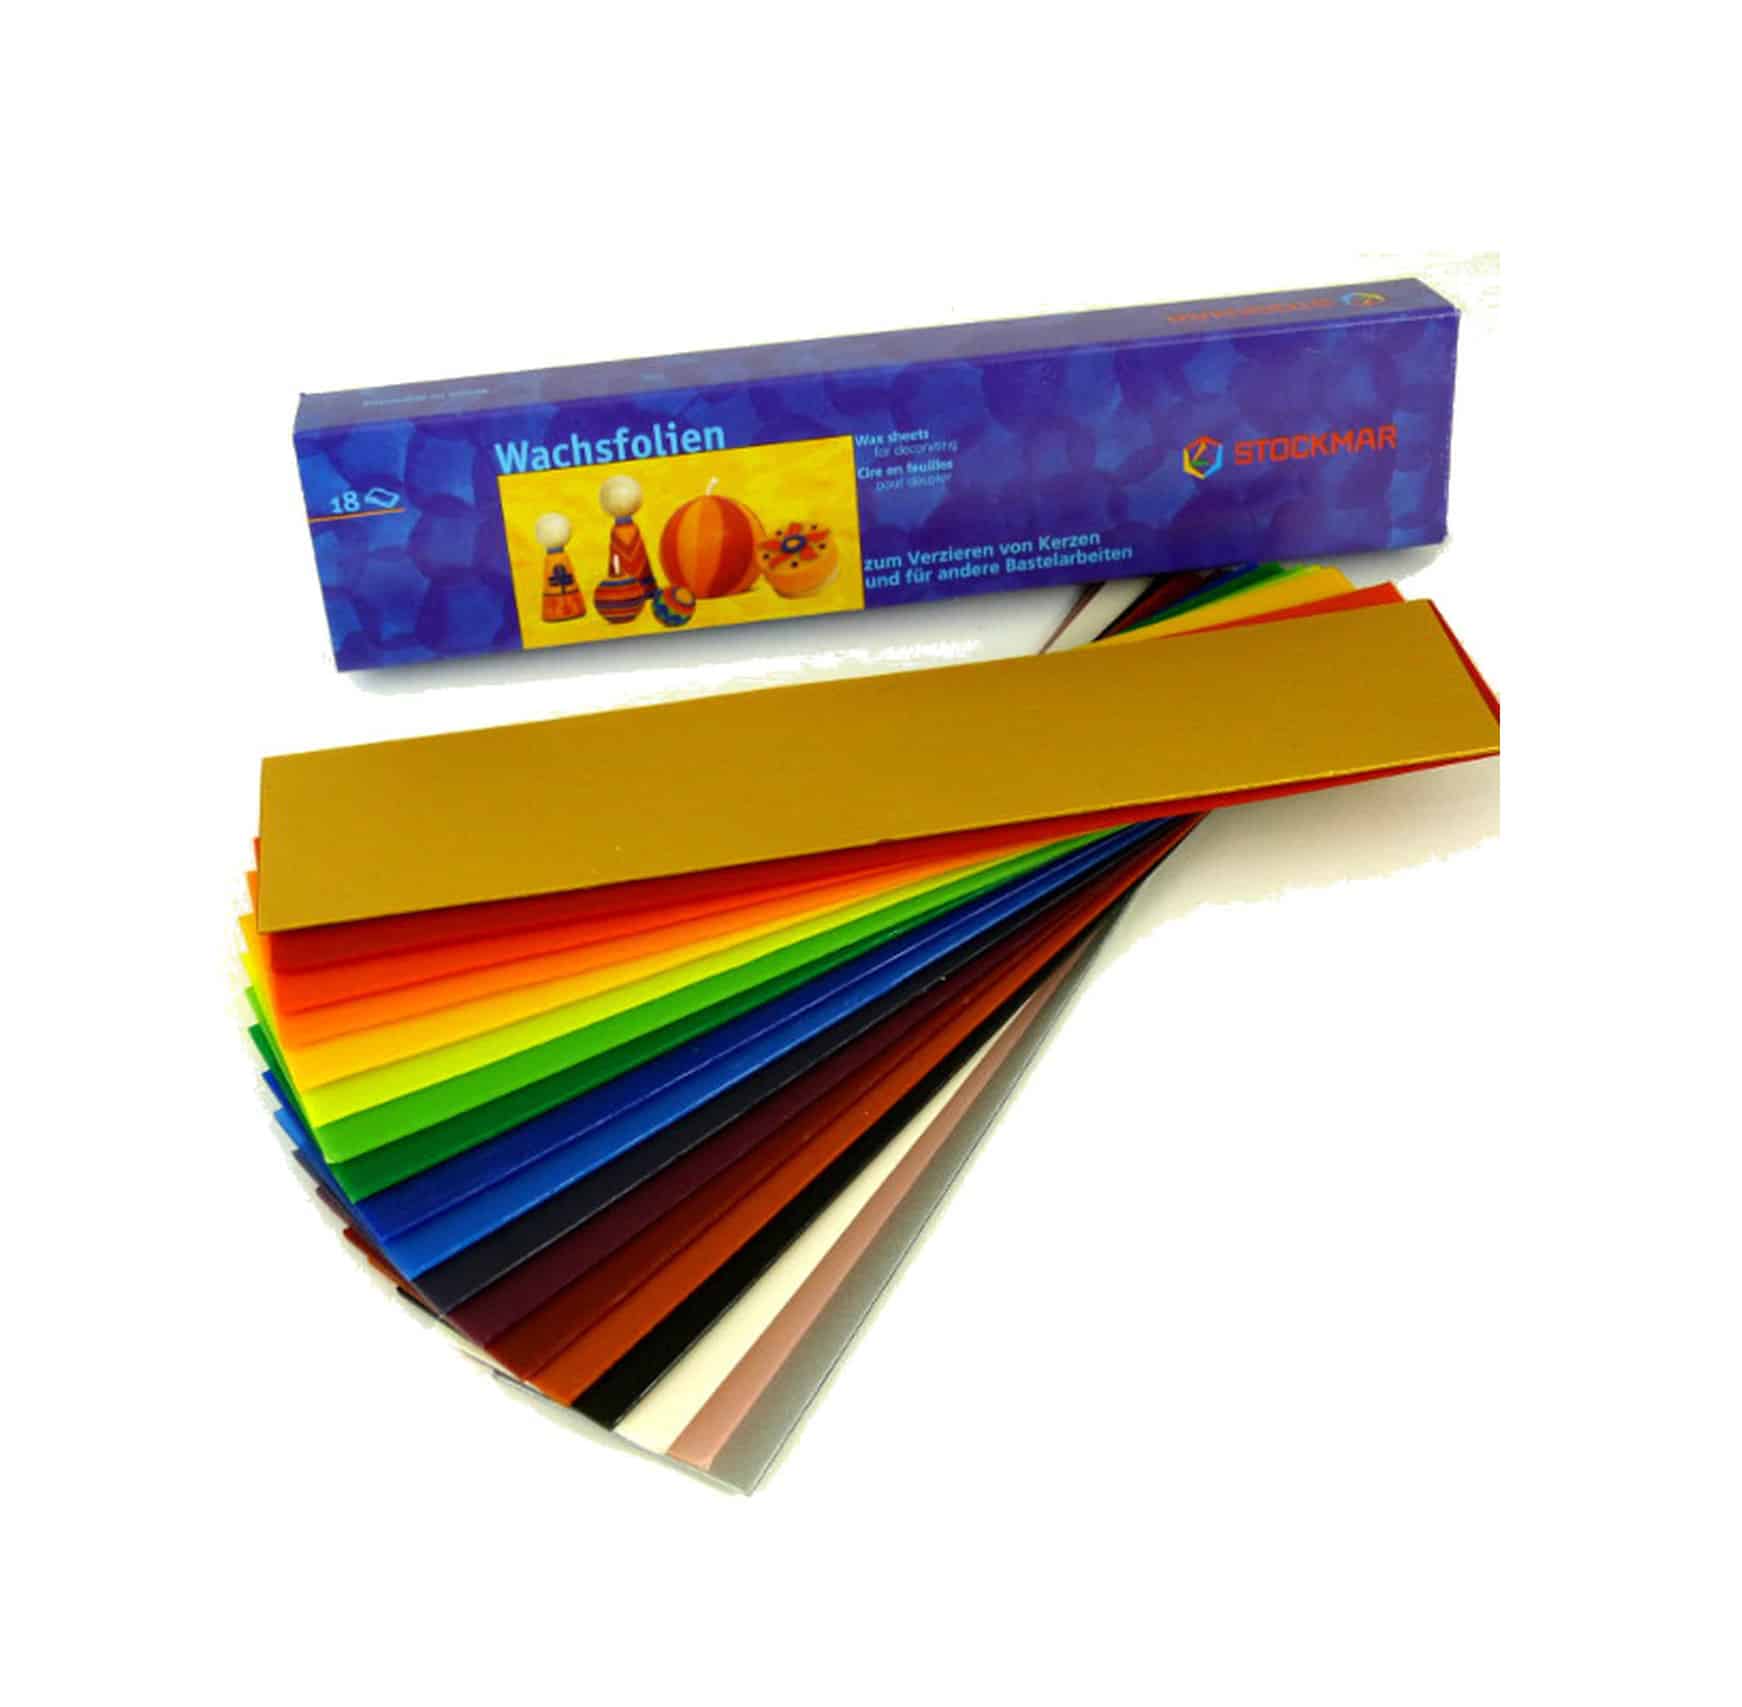 Decorating beeswax narrow in 18 colours - Stockmar